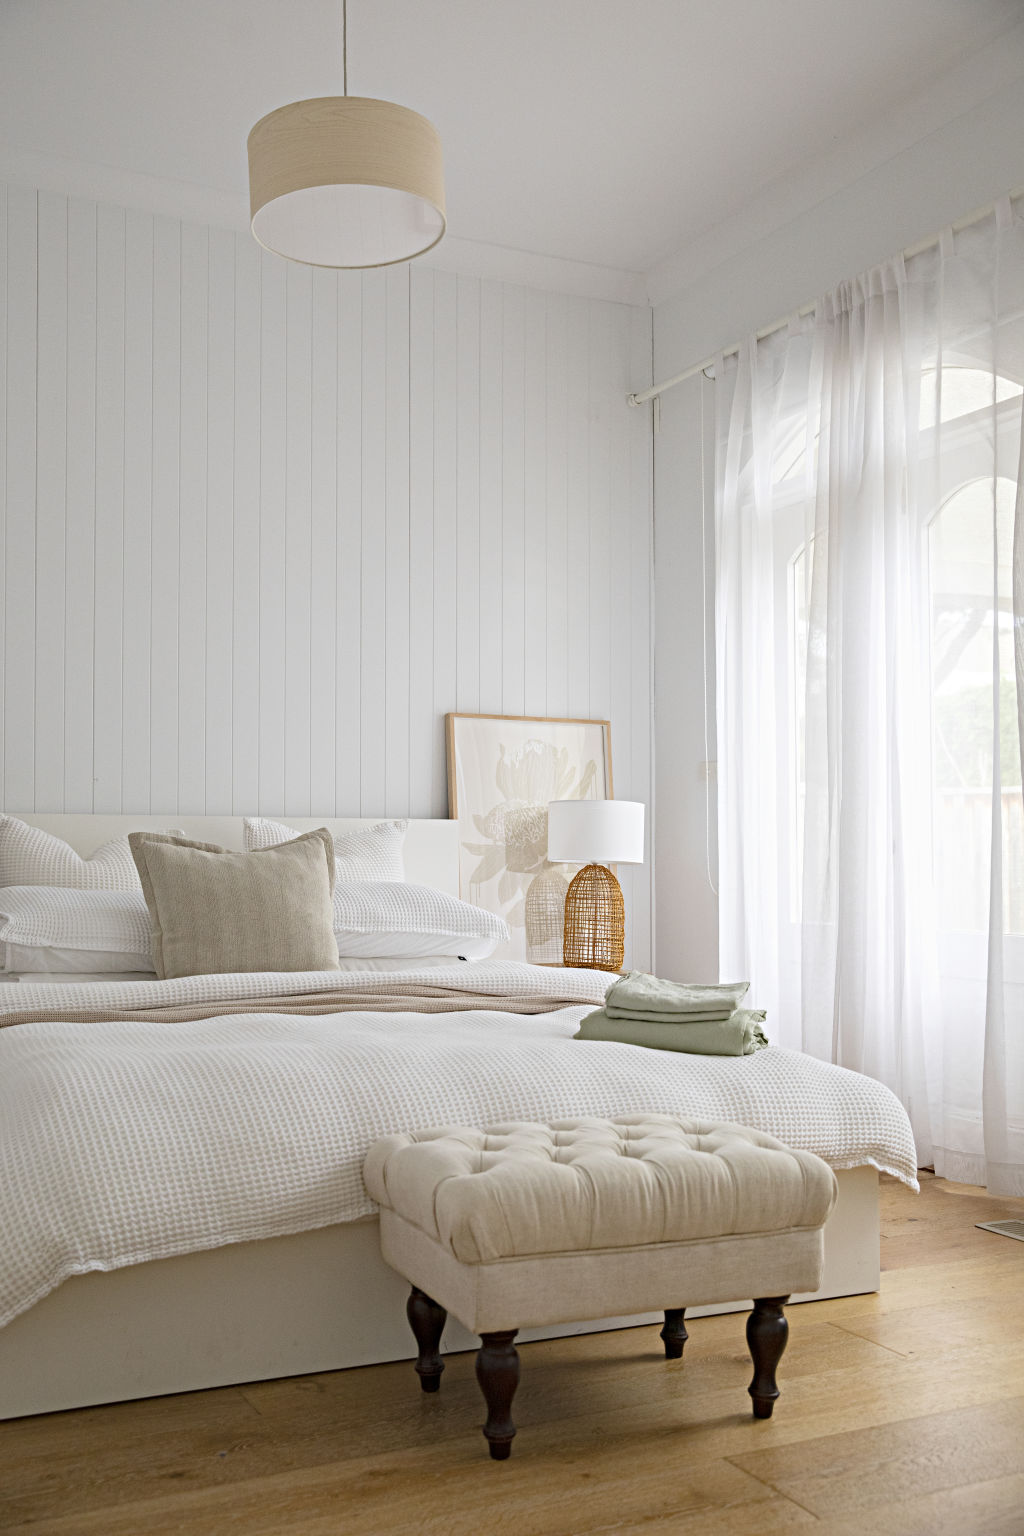 Ibbotson opted for a neutral coastal look throughout the home. Photo: Natalie Jeffcott